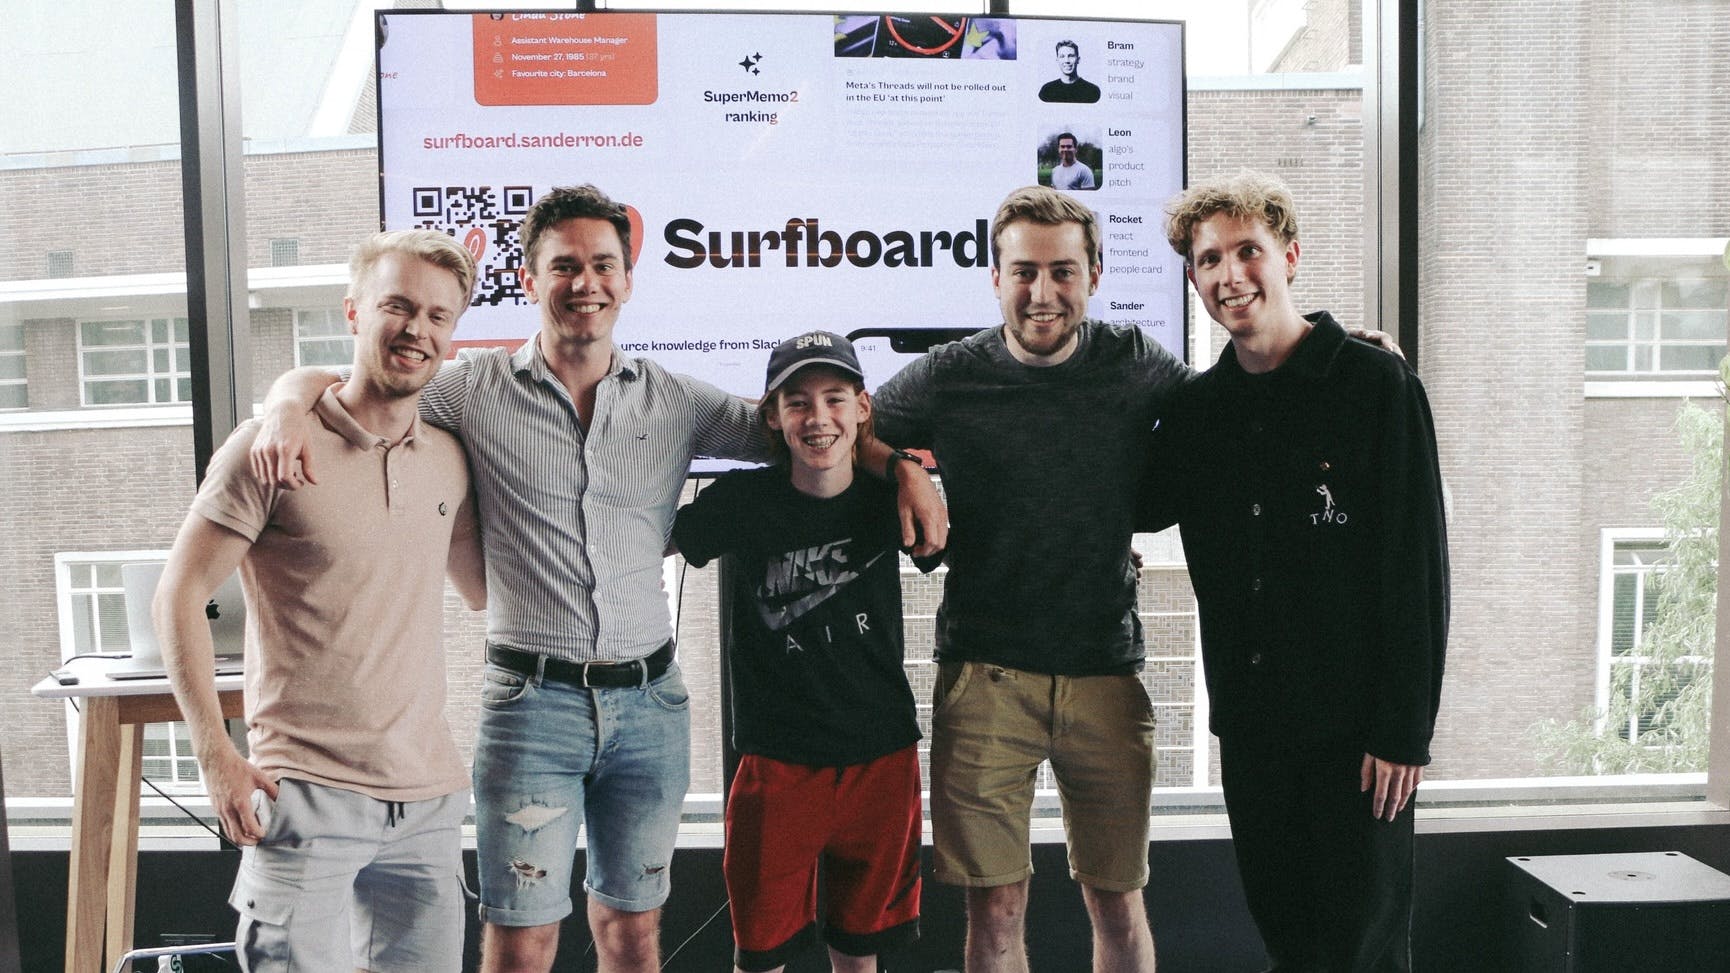 A picture of the five team members standing in front of a big television screen showing a slide with the Surfboard logo on it. They are holding each other’s shoulders and smiling at the camera. From left to right are myself, Leon, Rocket, Sander and Bram.